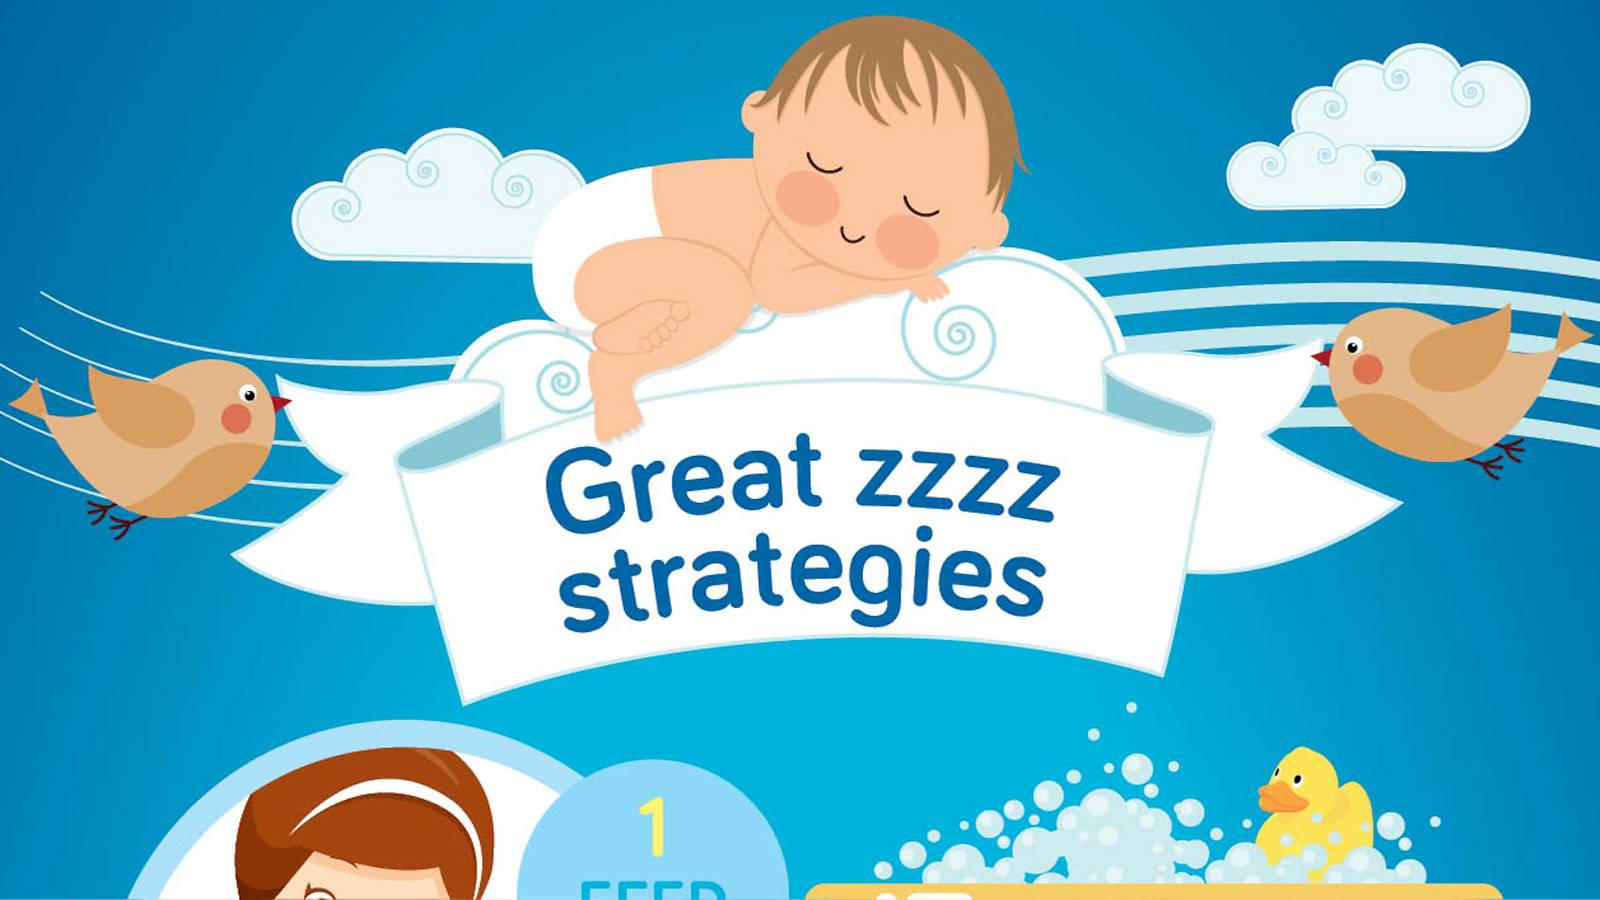 Babies-8-ways-to-help-your-baby-sleep-soundly-[Infographic]-1